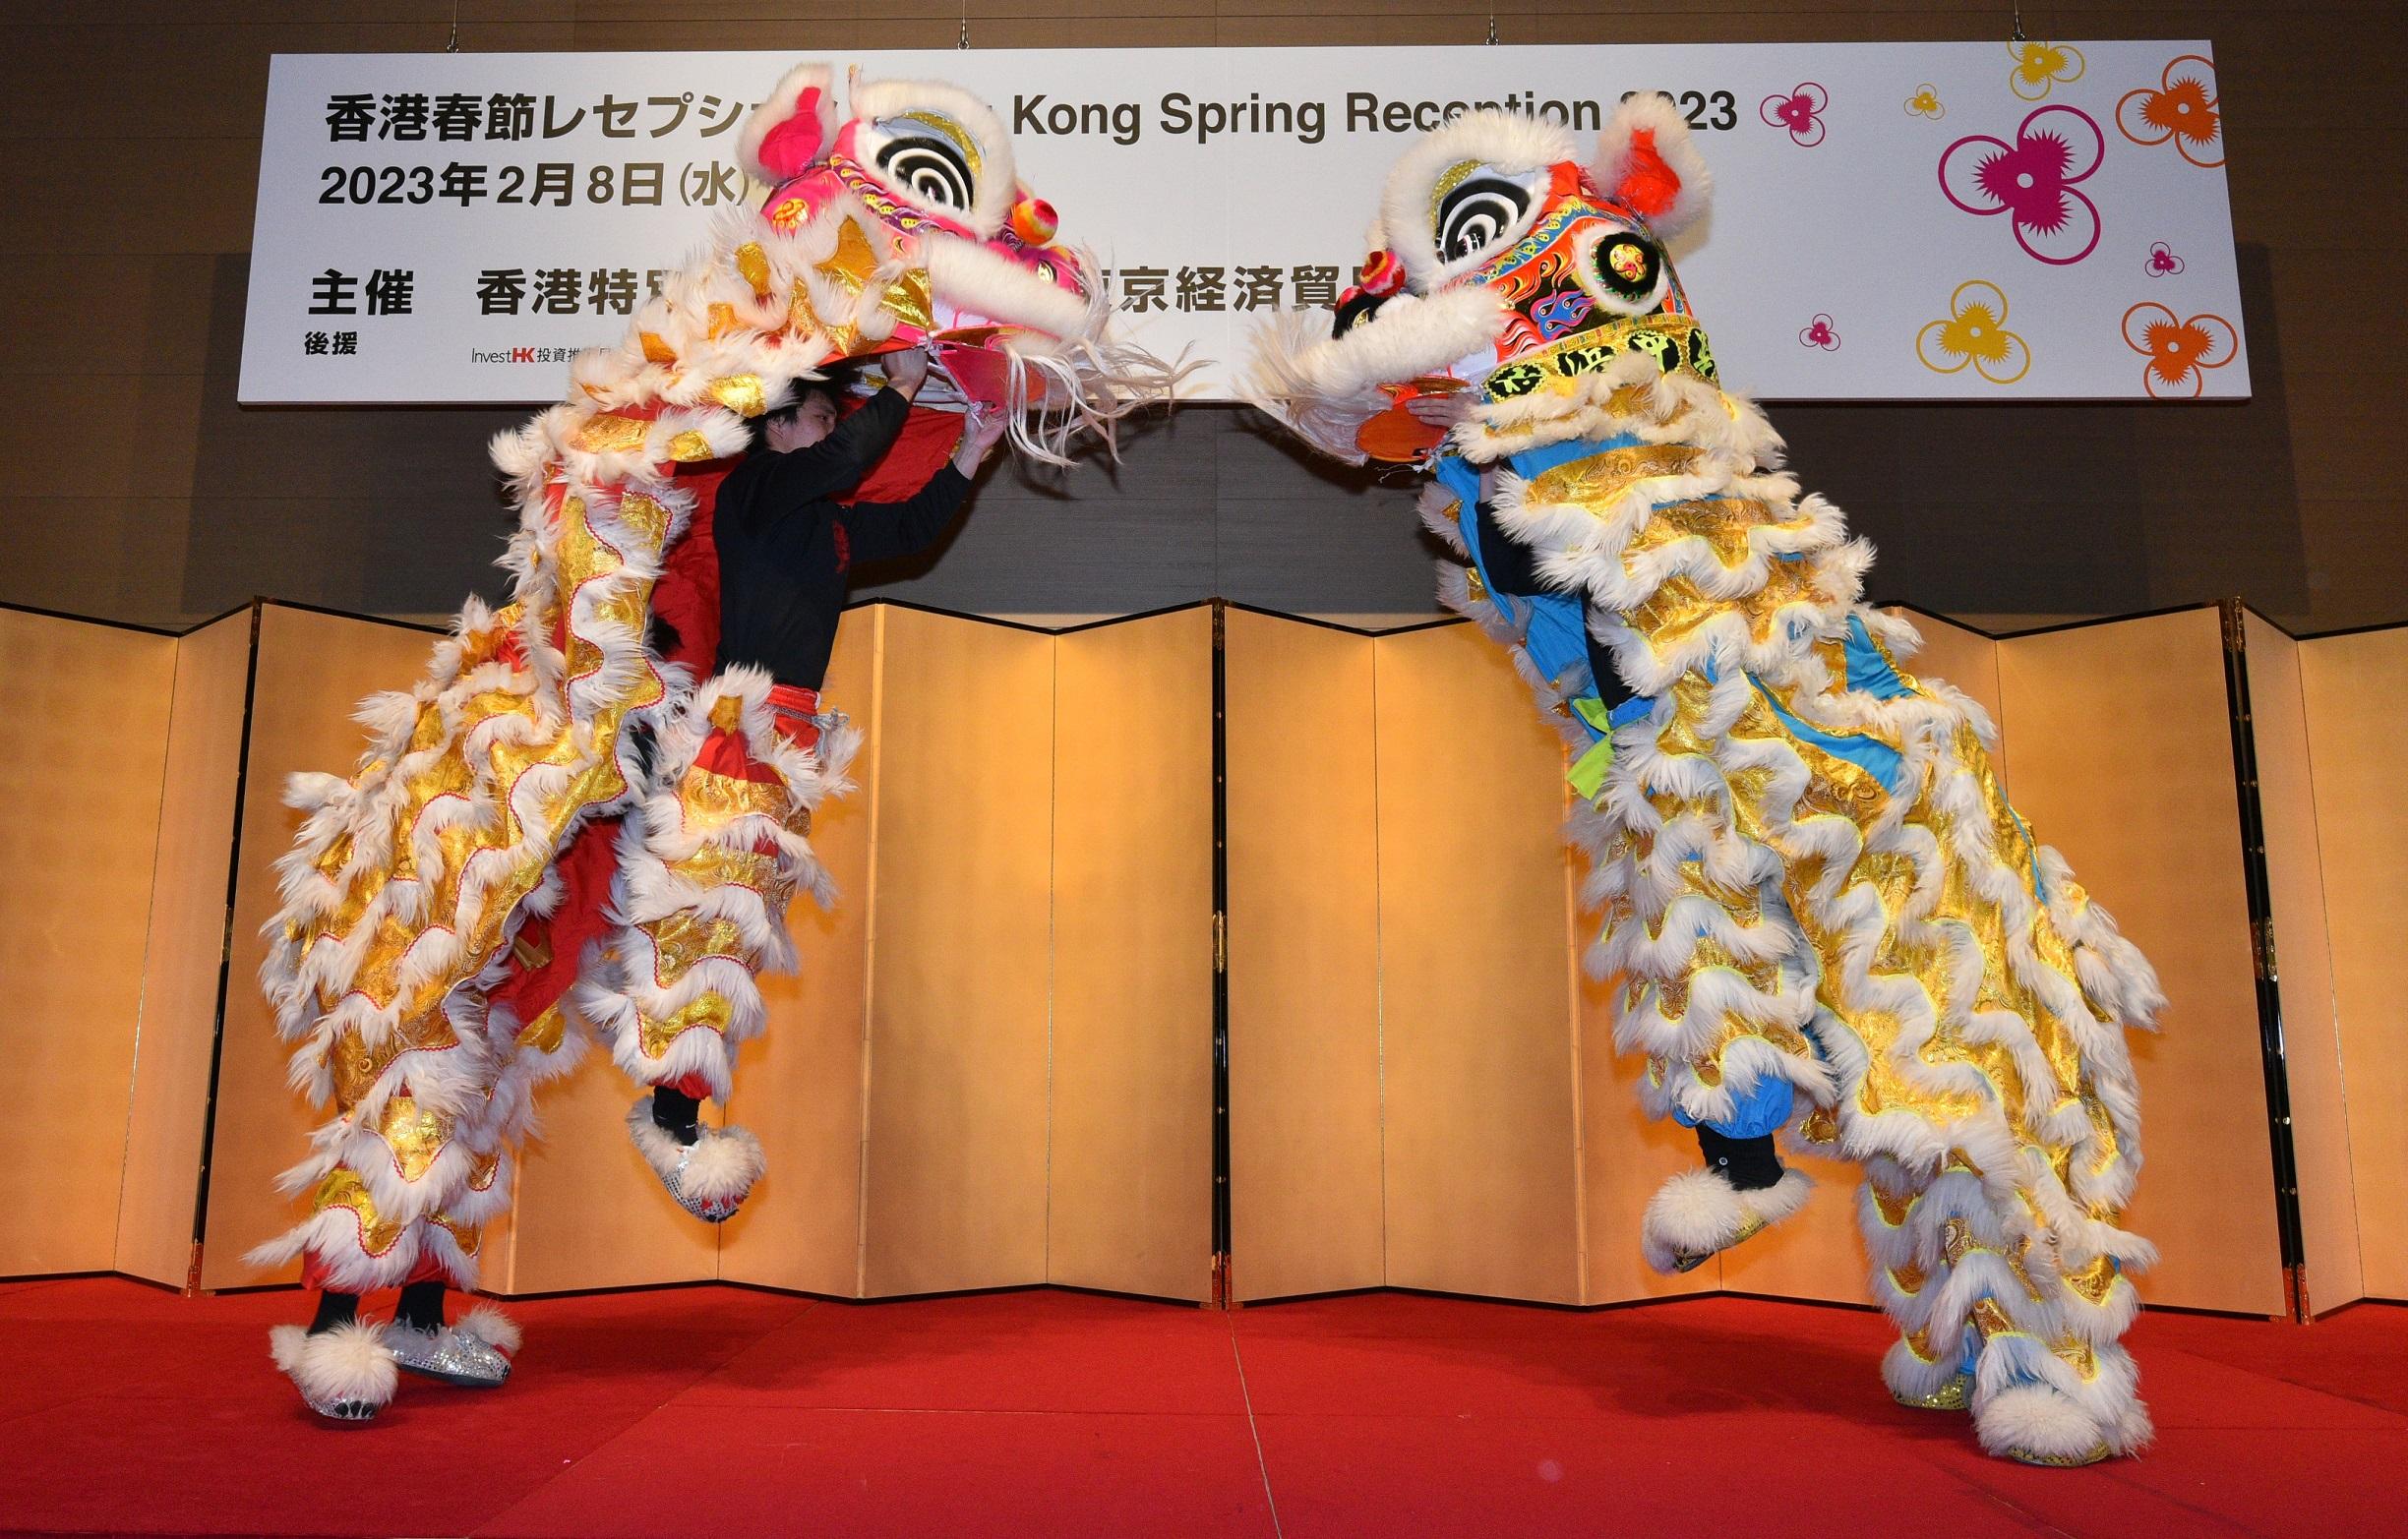 A lion dance is performed at the spring reception held by the Hong Kong Economic and Trade Office (Tokyo) today (February 8) to celebrate the Chinese New Year.